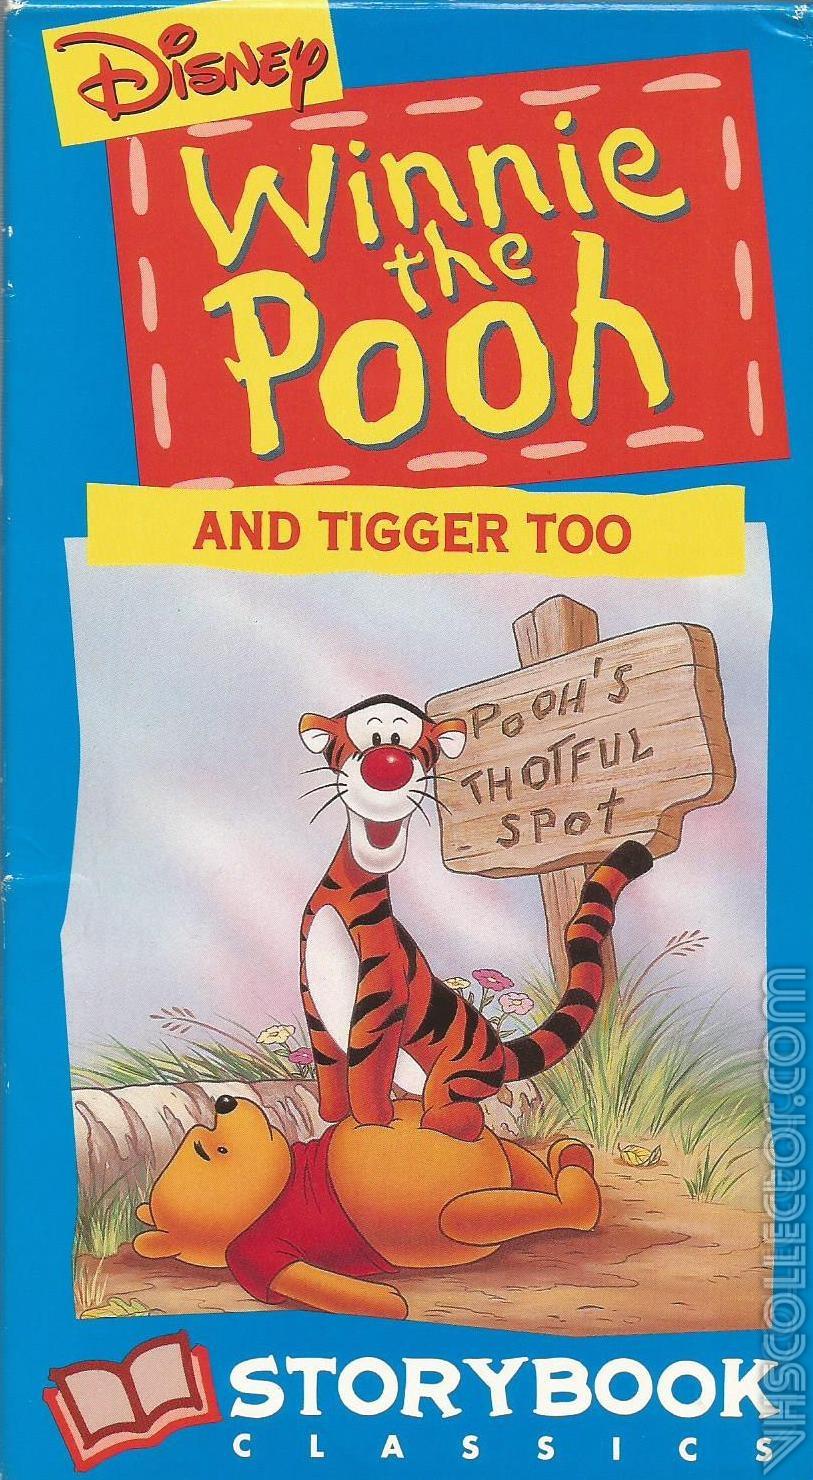 Winnie the Pooh and Tigger Too: Storybook Classics | VHSCollector.com